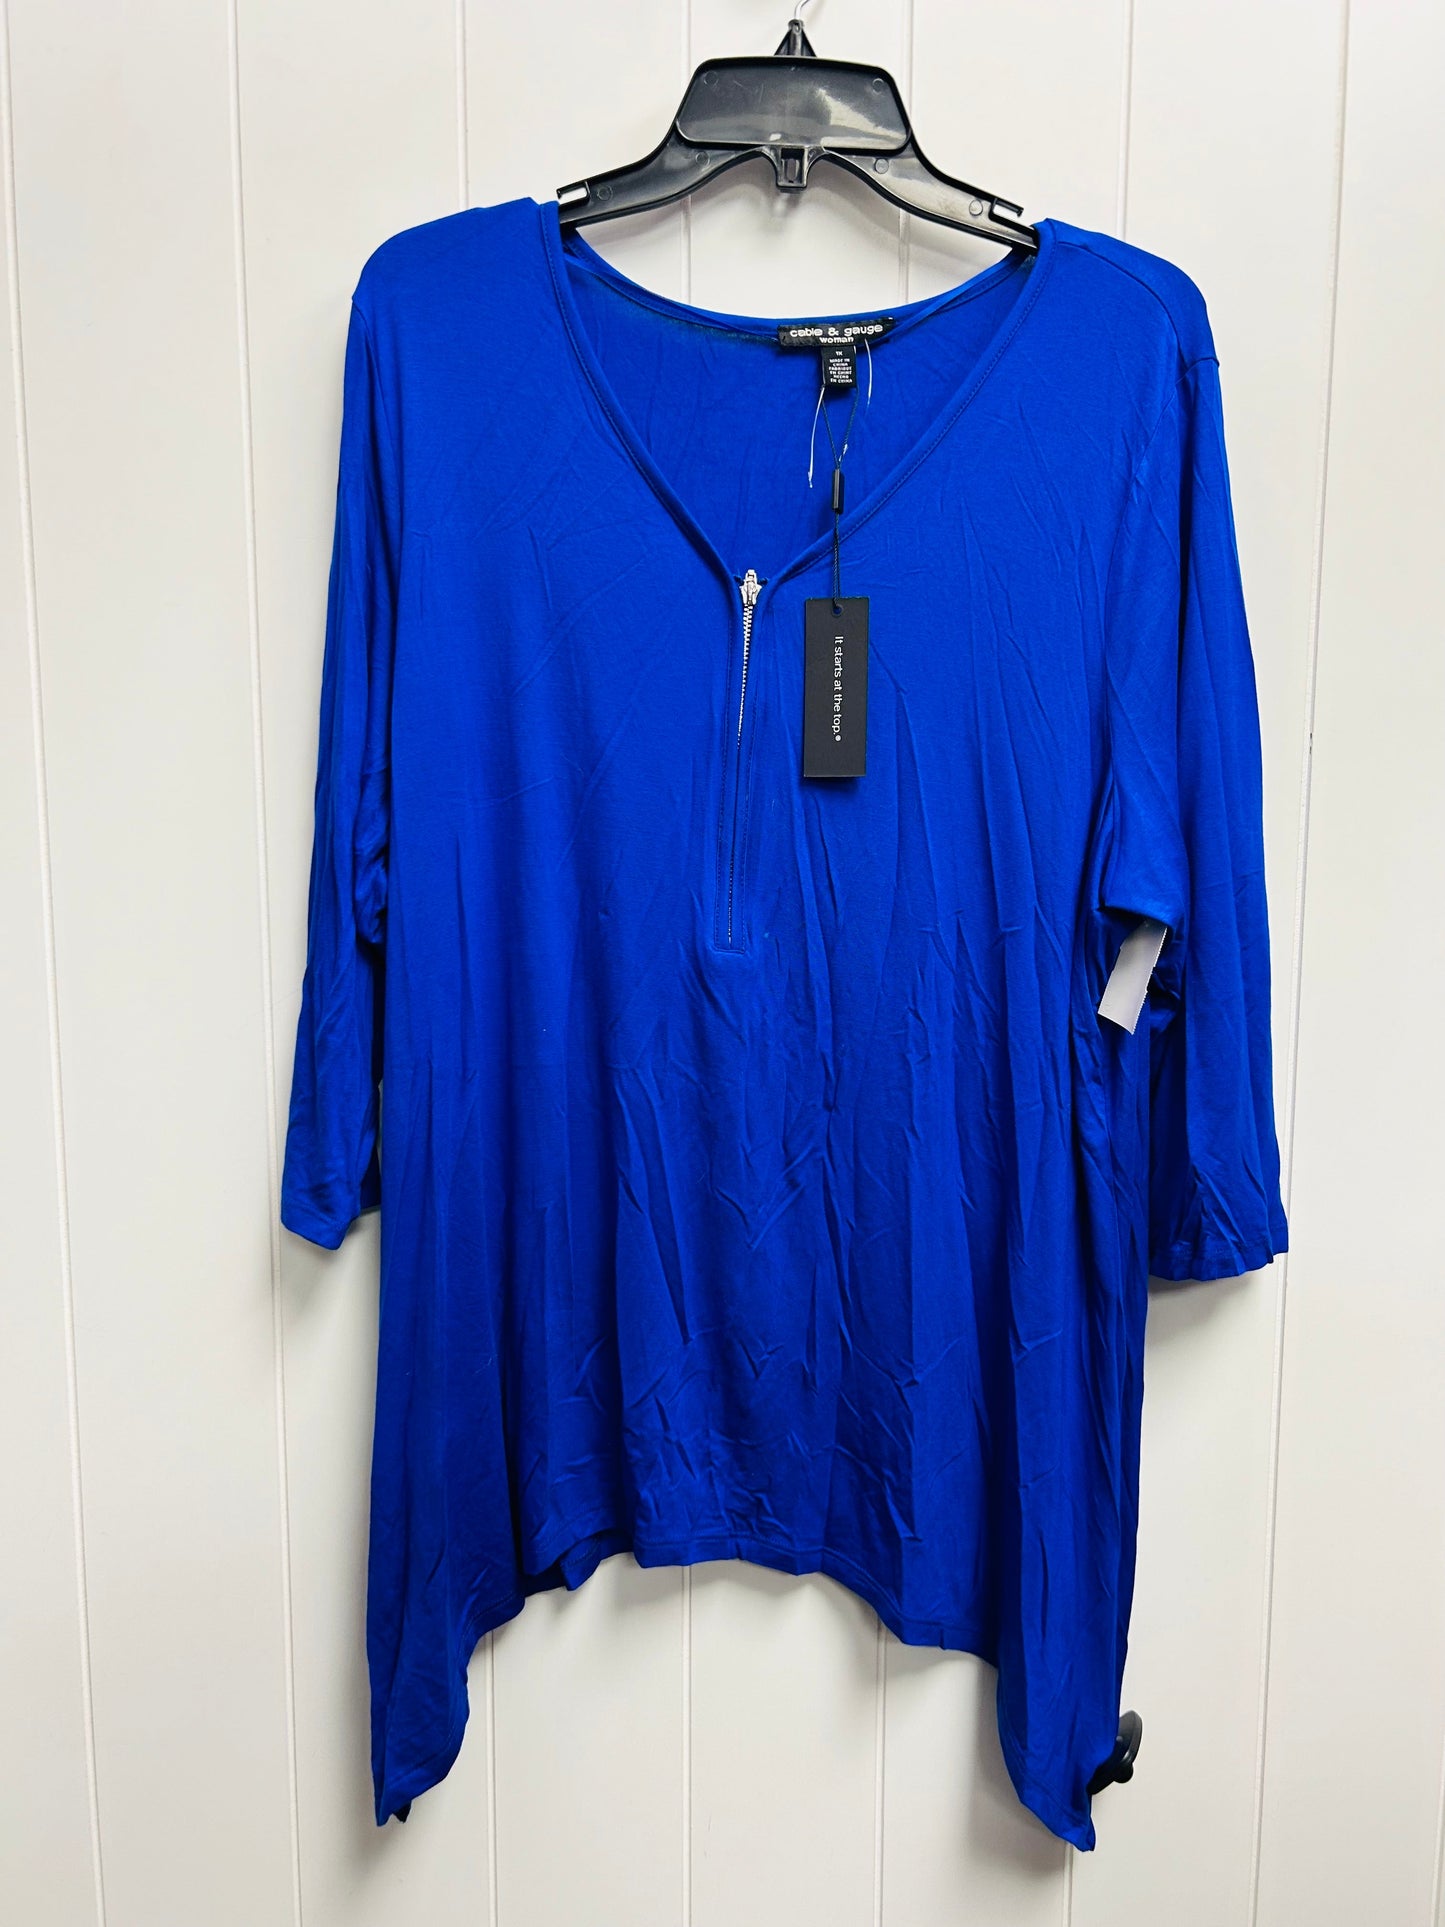 Blue Top Long Sleeve Cable And Gauge, Size 1x